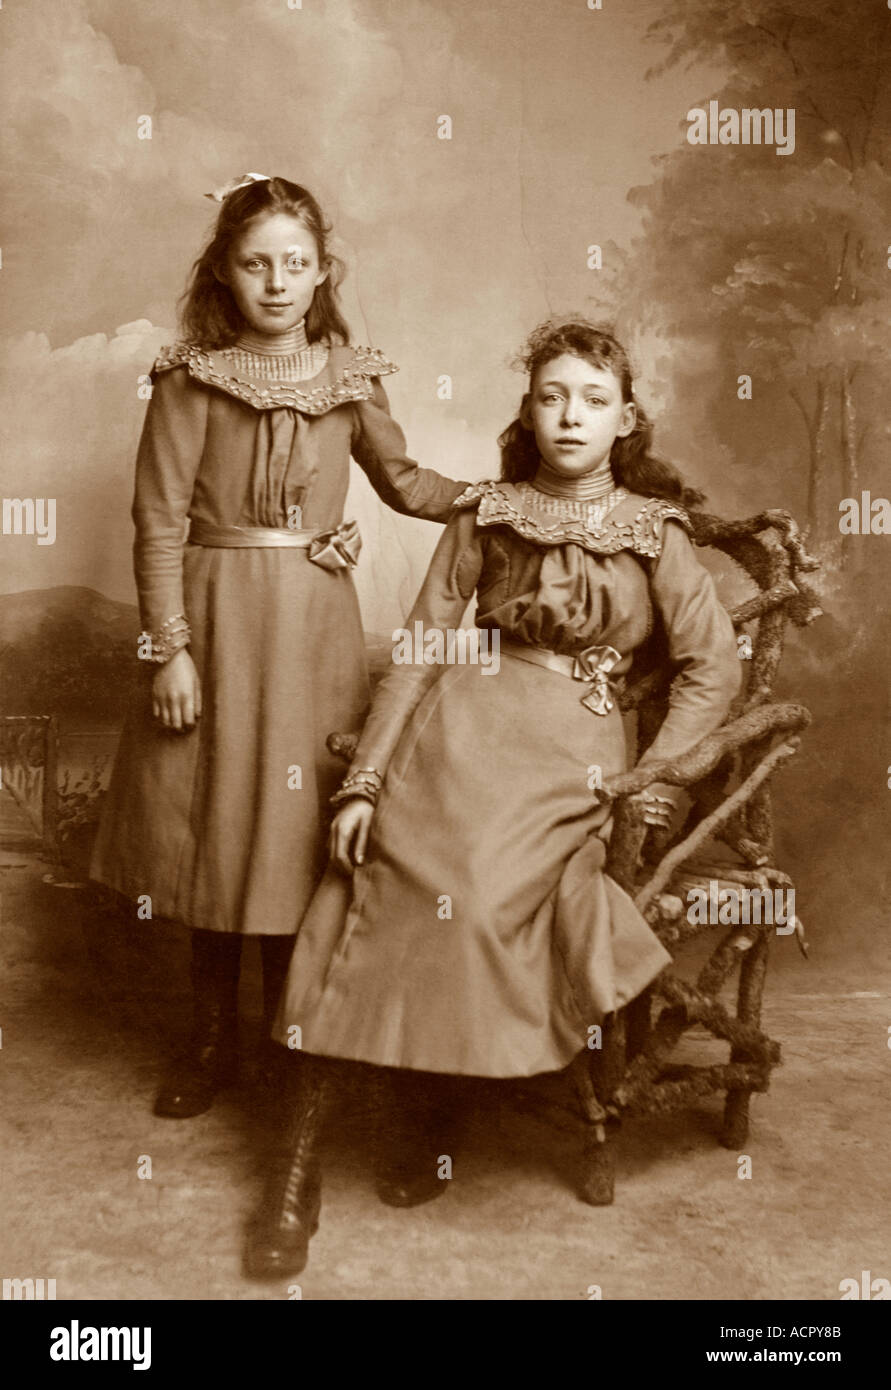 Original cabinet card photograph portrait of two pretty young Victorian or Edwardian era girls, probably sisters - circa 1901 Salisbury, Wiltshire, UK Stock Photo